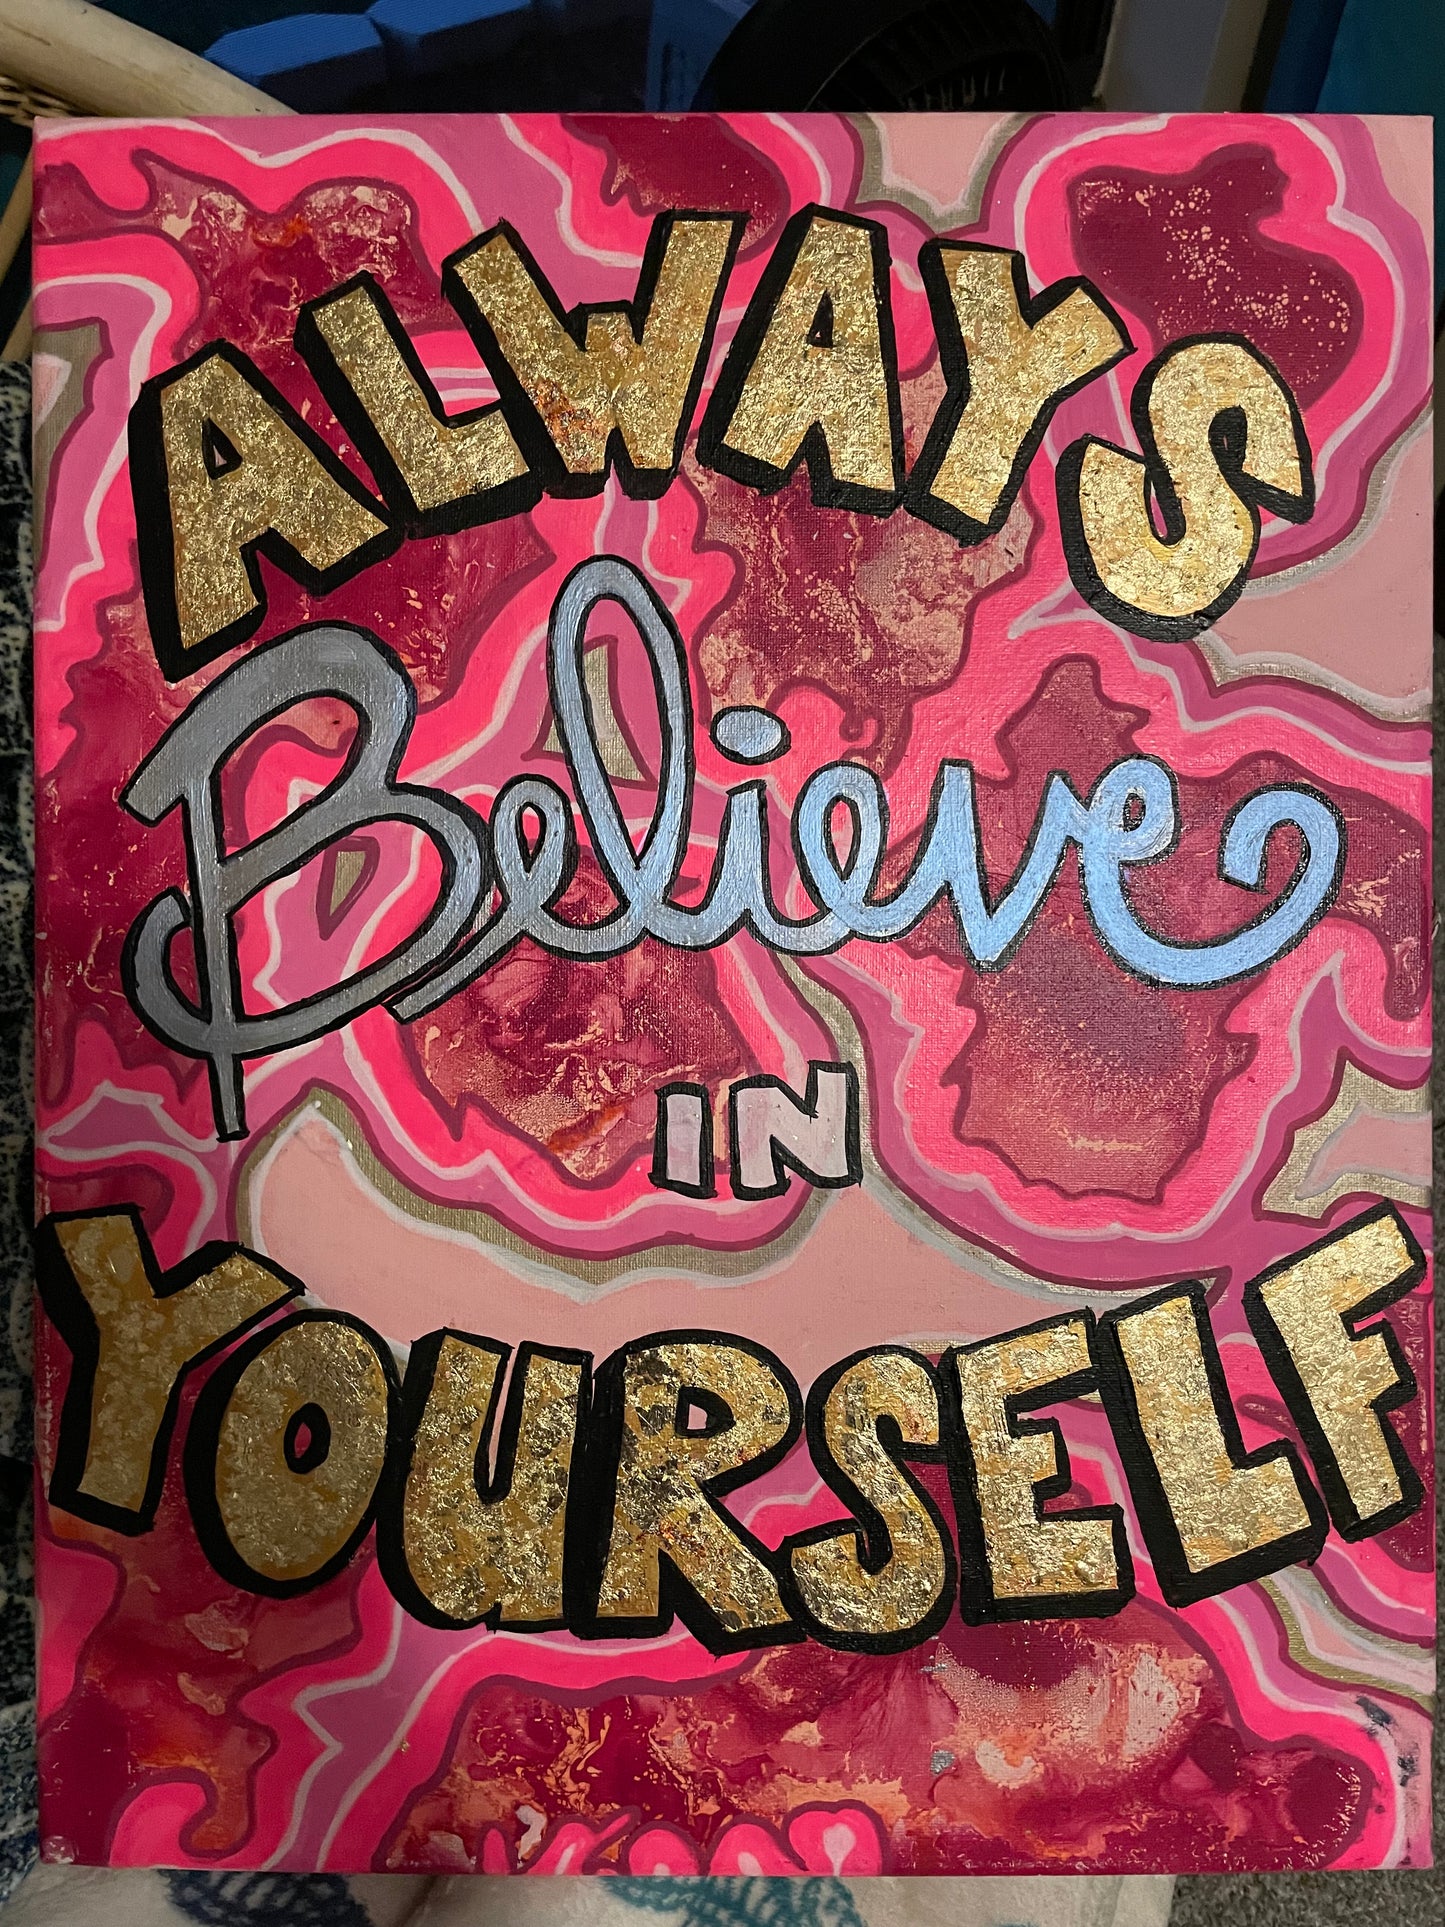 “Always Believe in Yourself” mixed media on canvas 24” x 18”